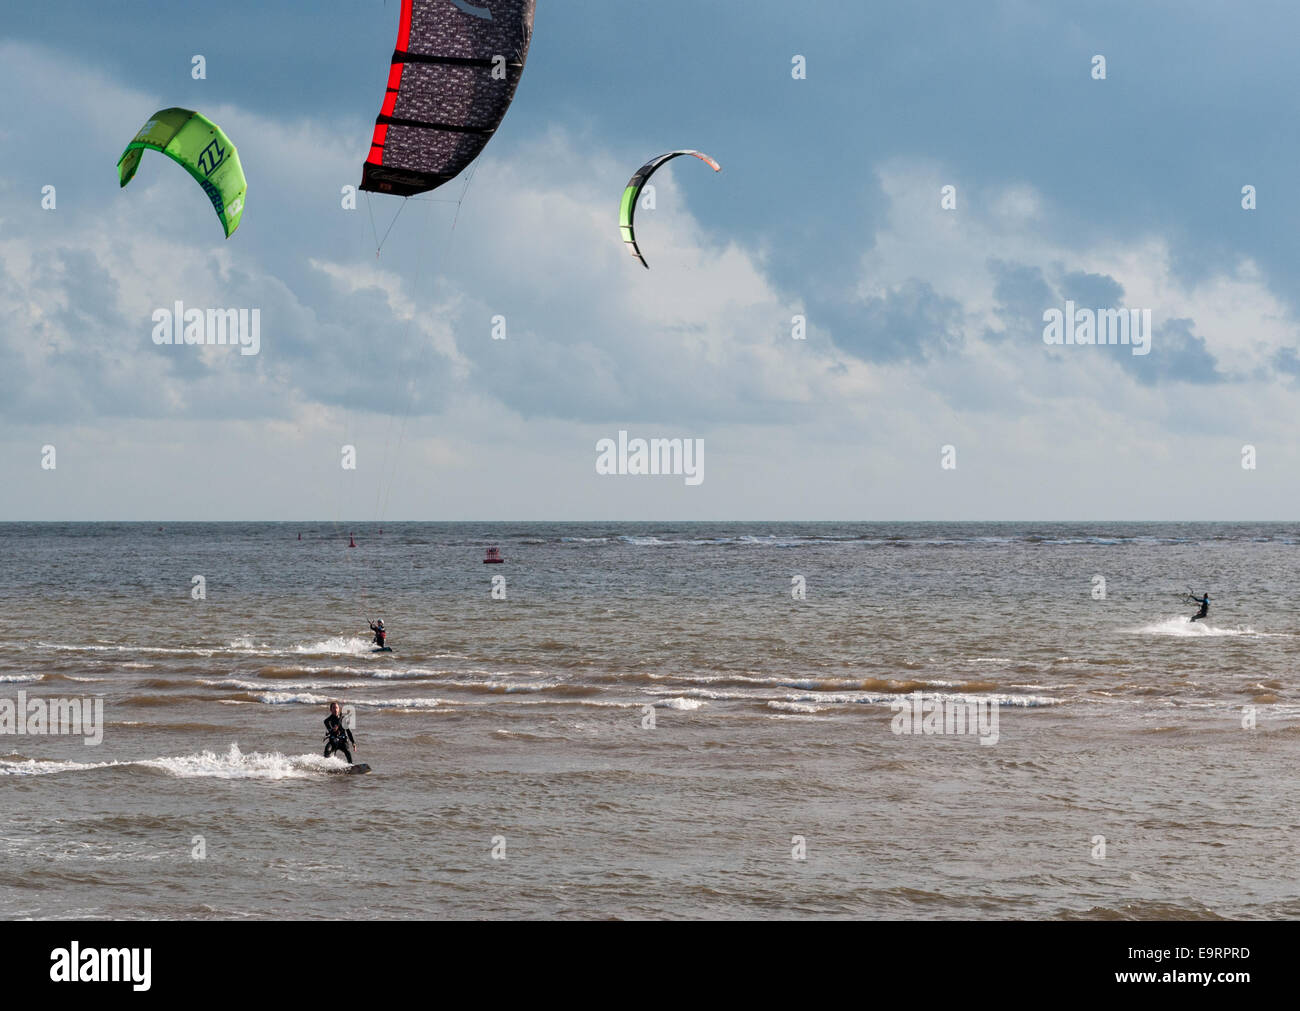 Kite surfers on a windy day at Exmouth in Devon, UK. Good conditions for kite surfing. Stock Photo